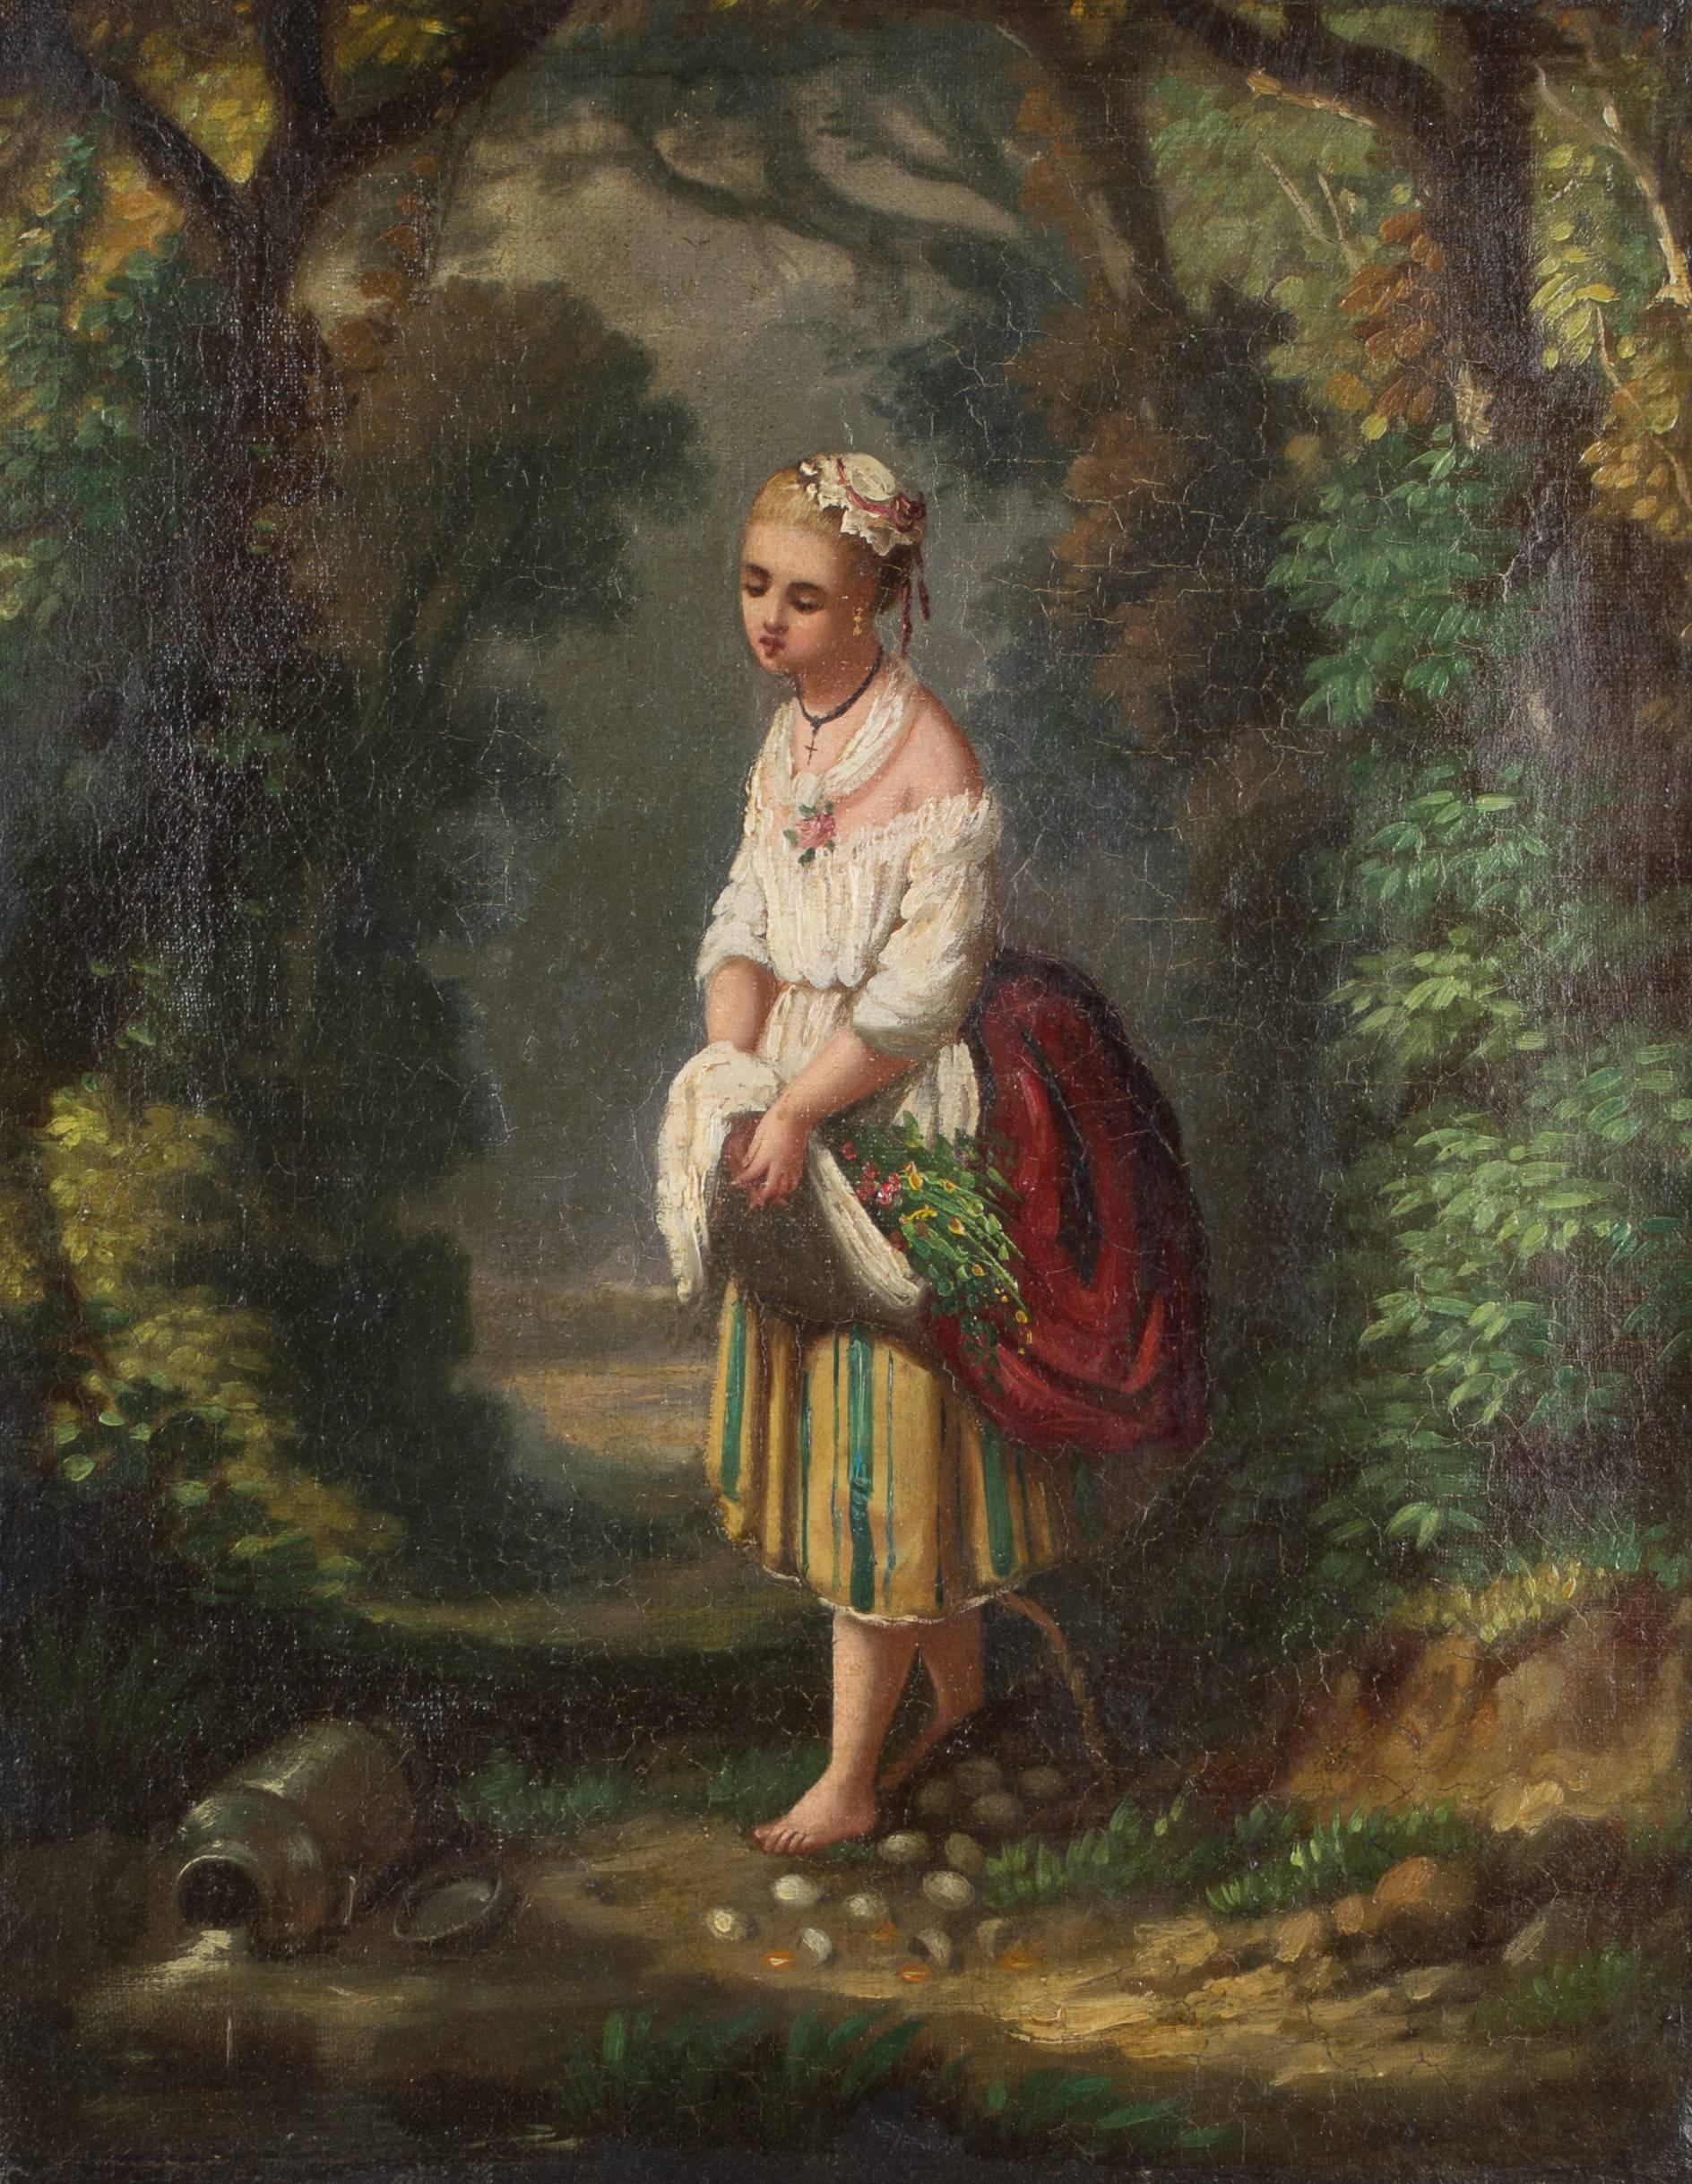 French oil on canvas depicting a young maiden with a spilled pail of milk and broken eggs on the ground at her feet. Inscription on the back of canvas: Souvenir de Tante Isle à Jacqueline,1936. Painting is in good condition with vibrant color. The